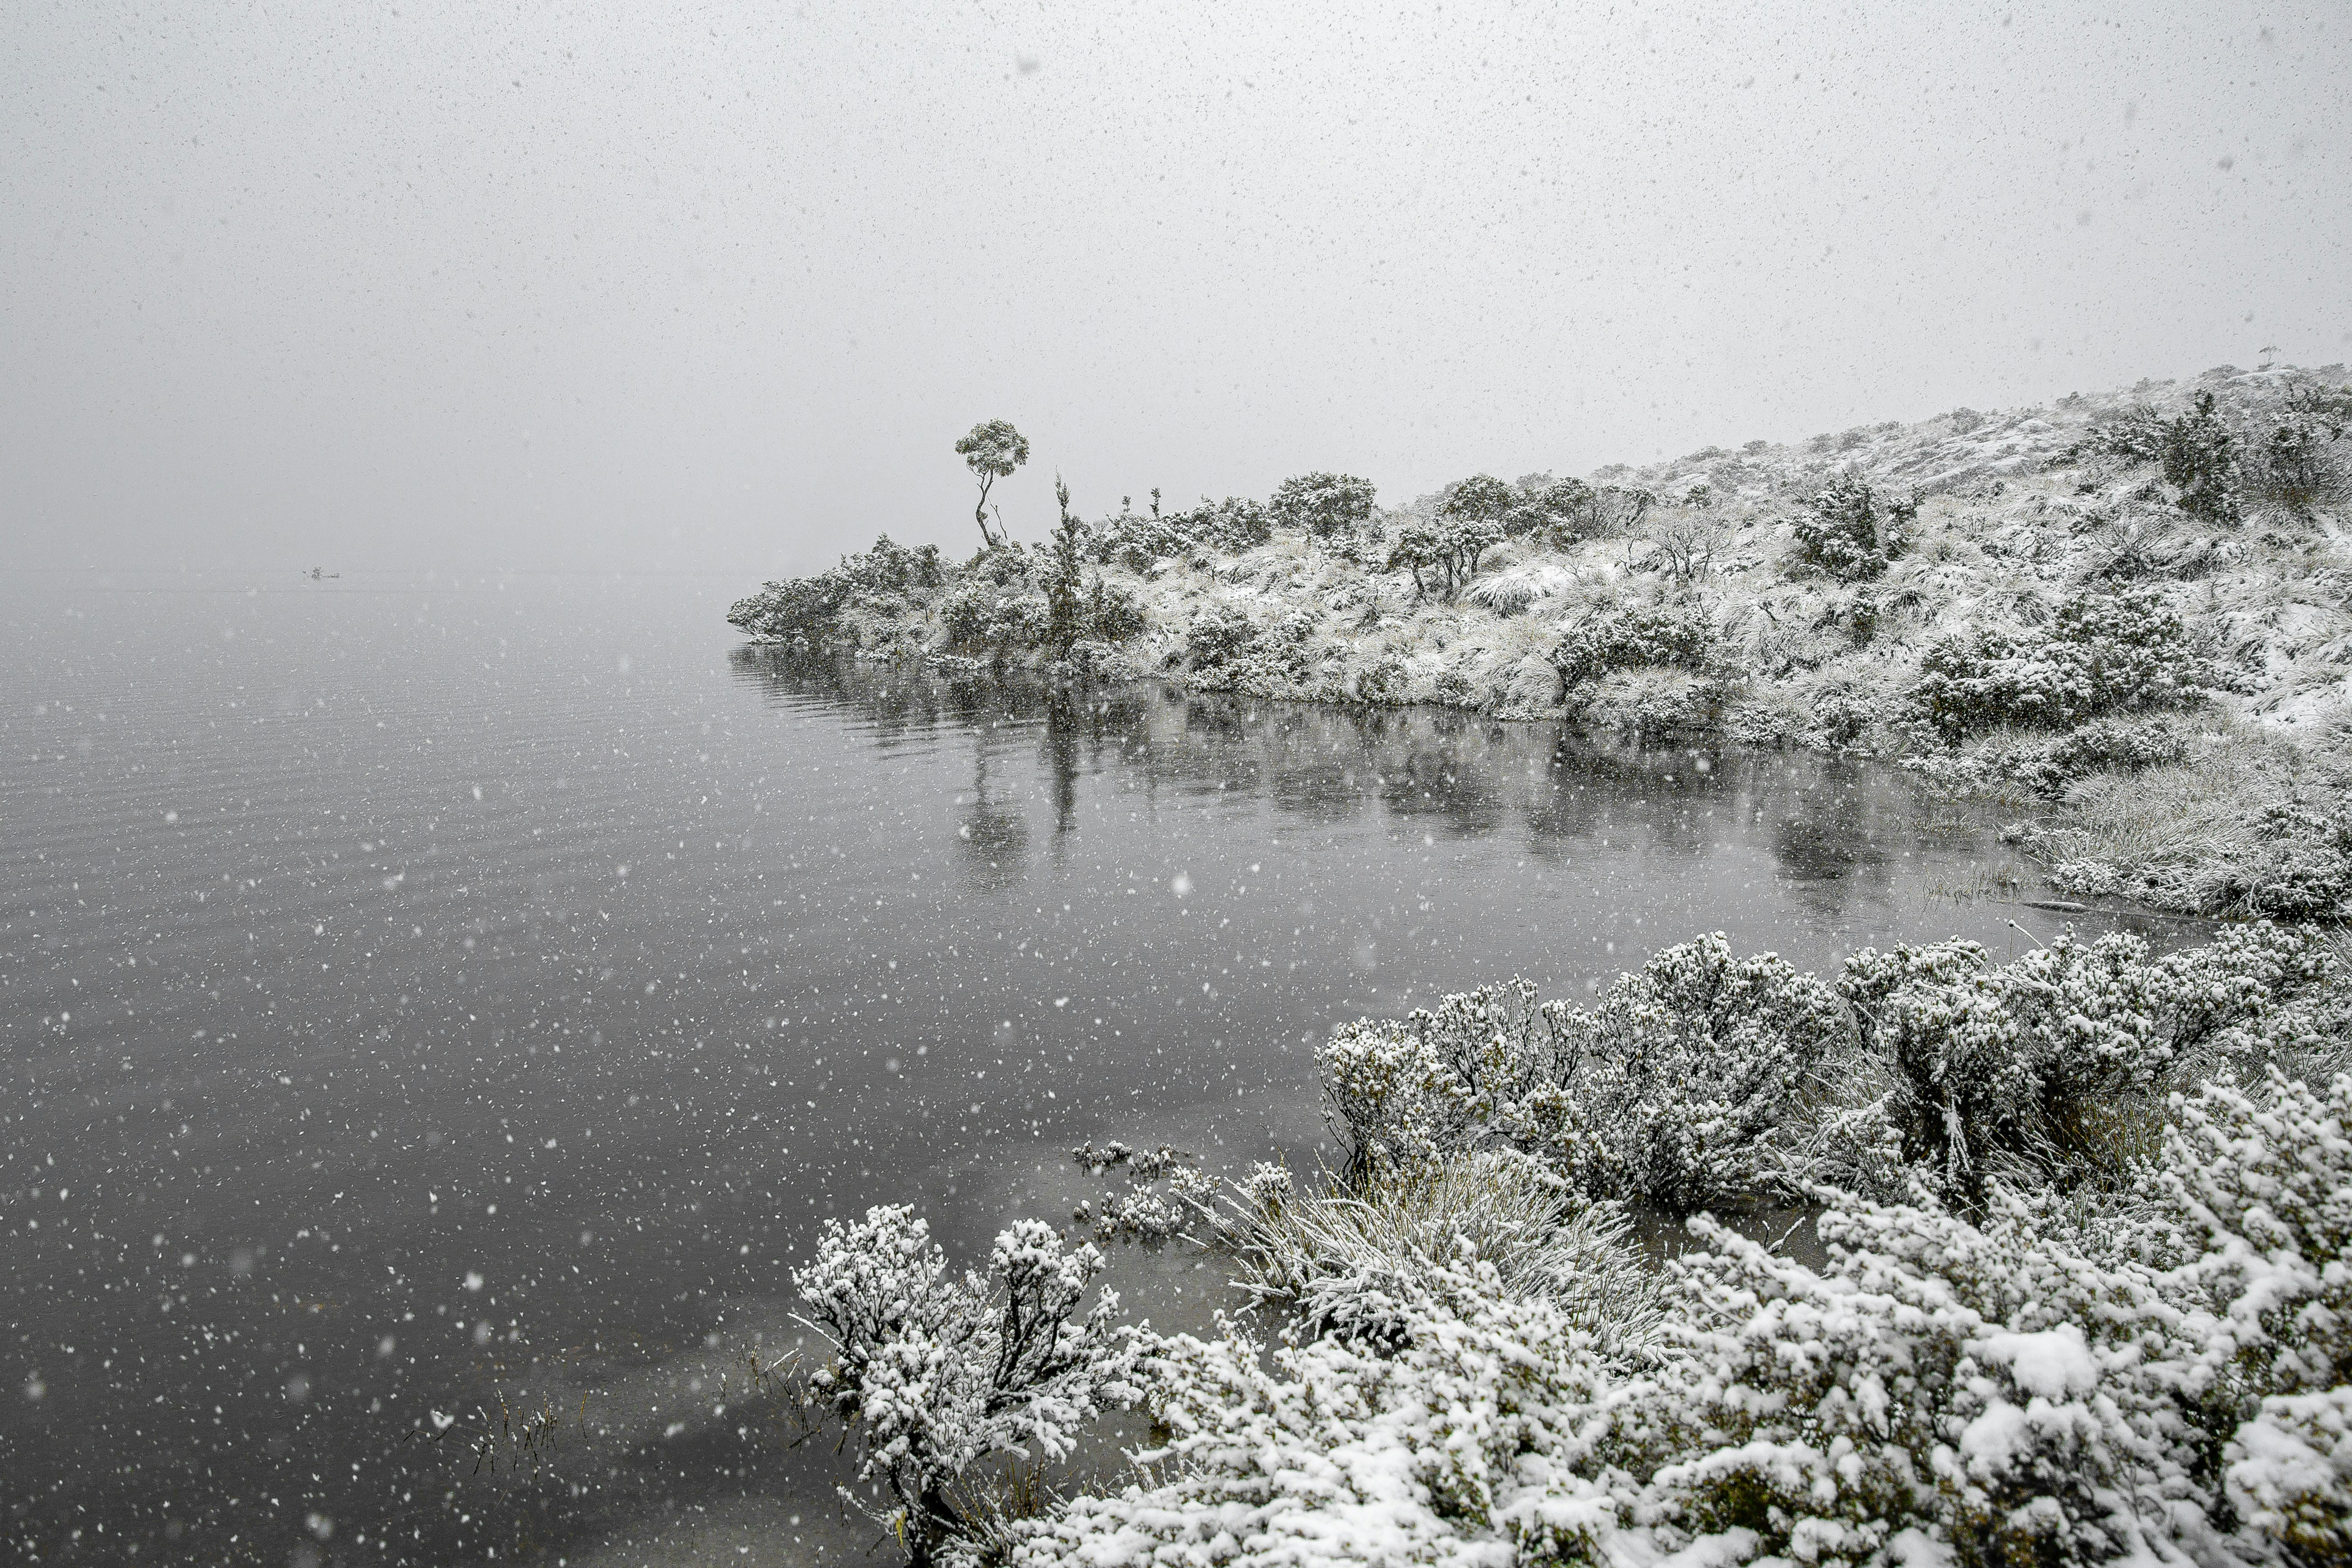 snow covered trees and plants on body of water